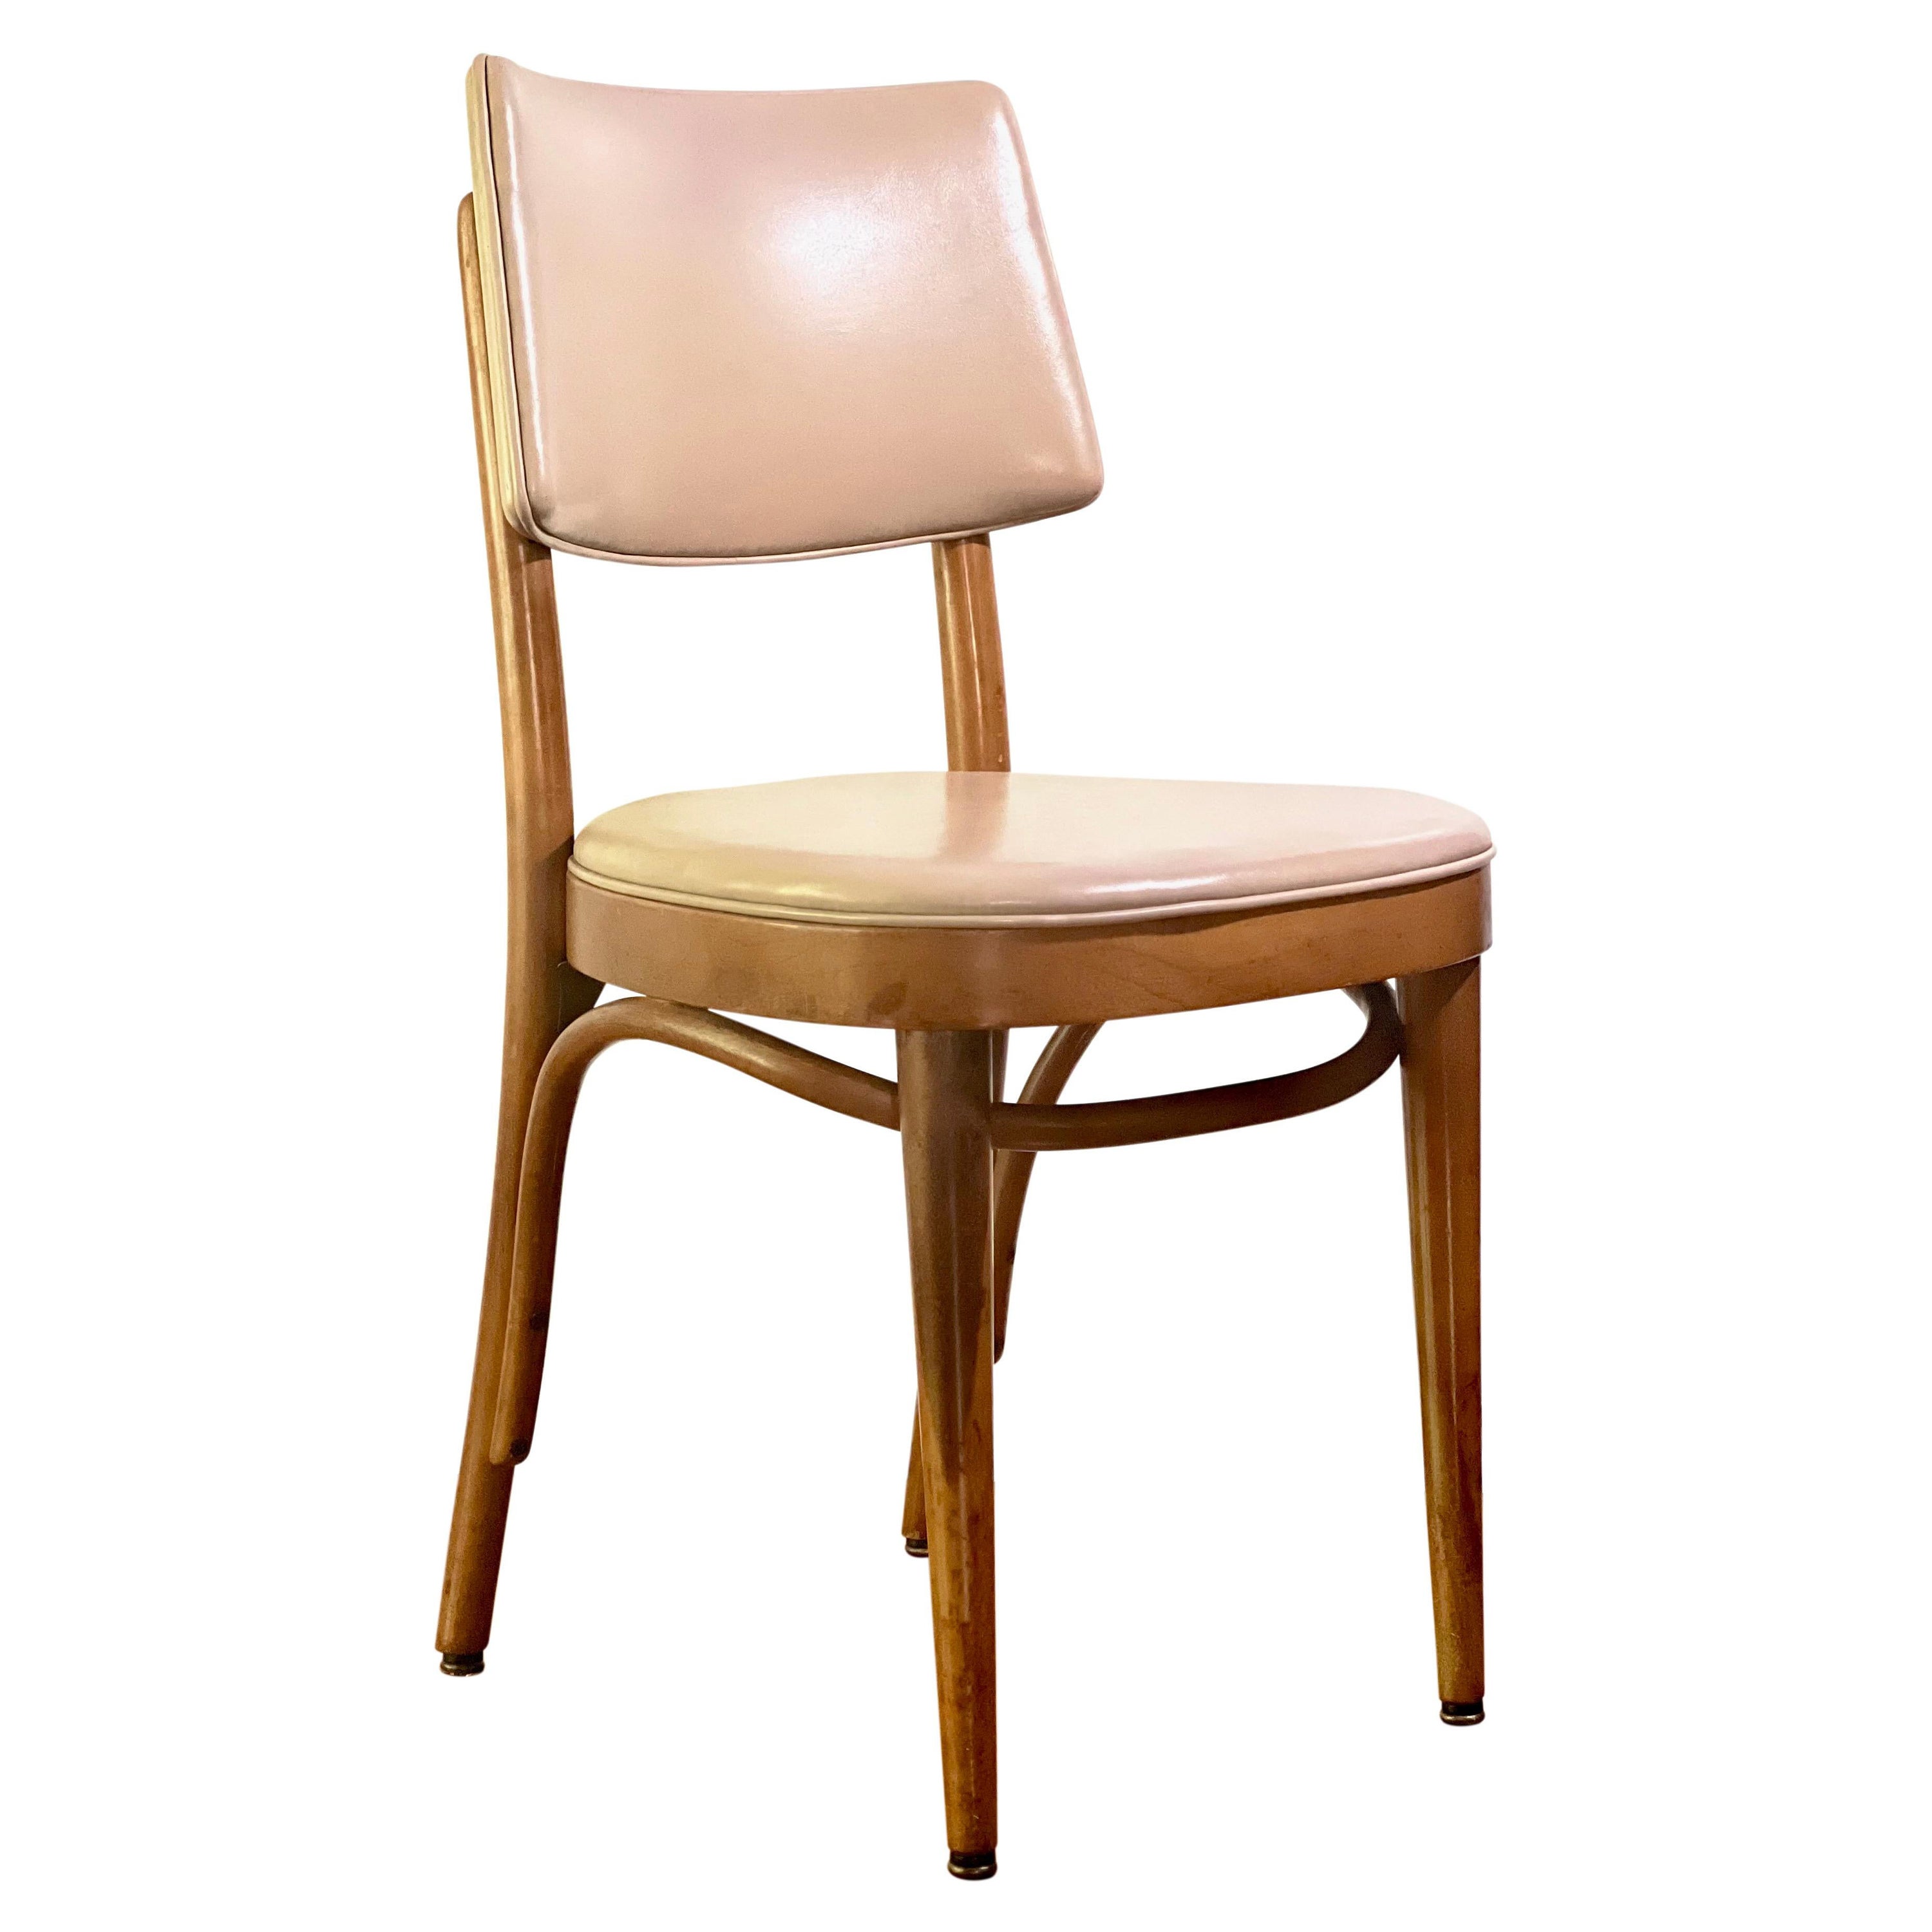 Midcentury Thonet Bentwood Upholstered Chair For Sale